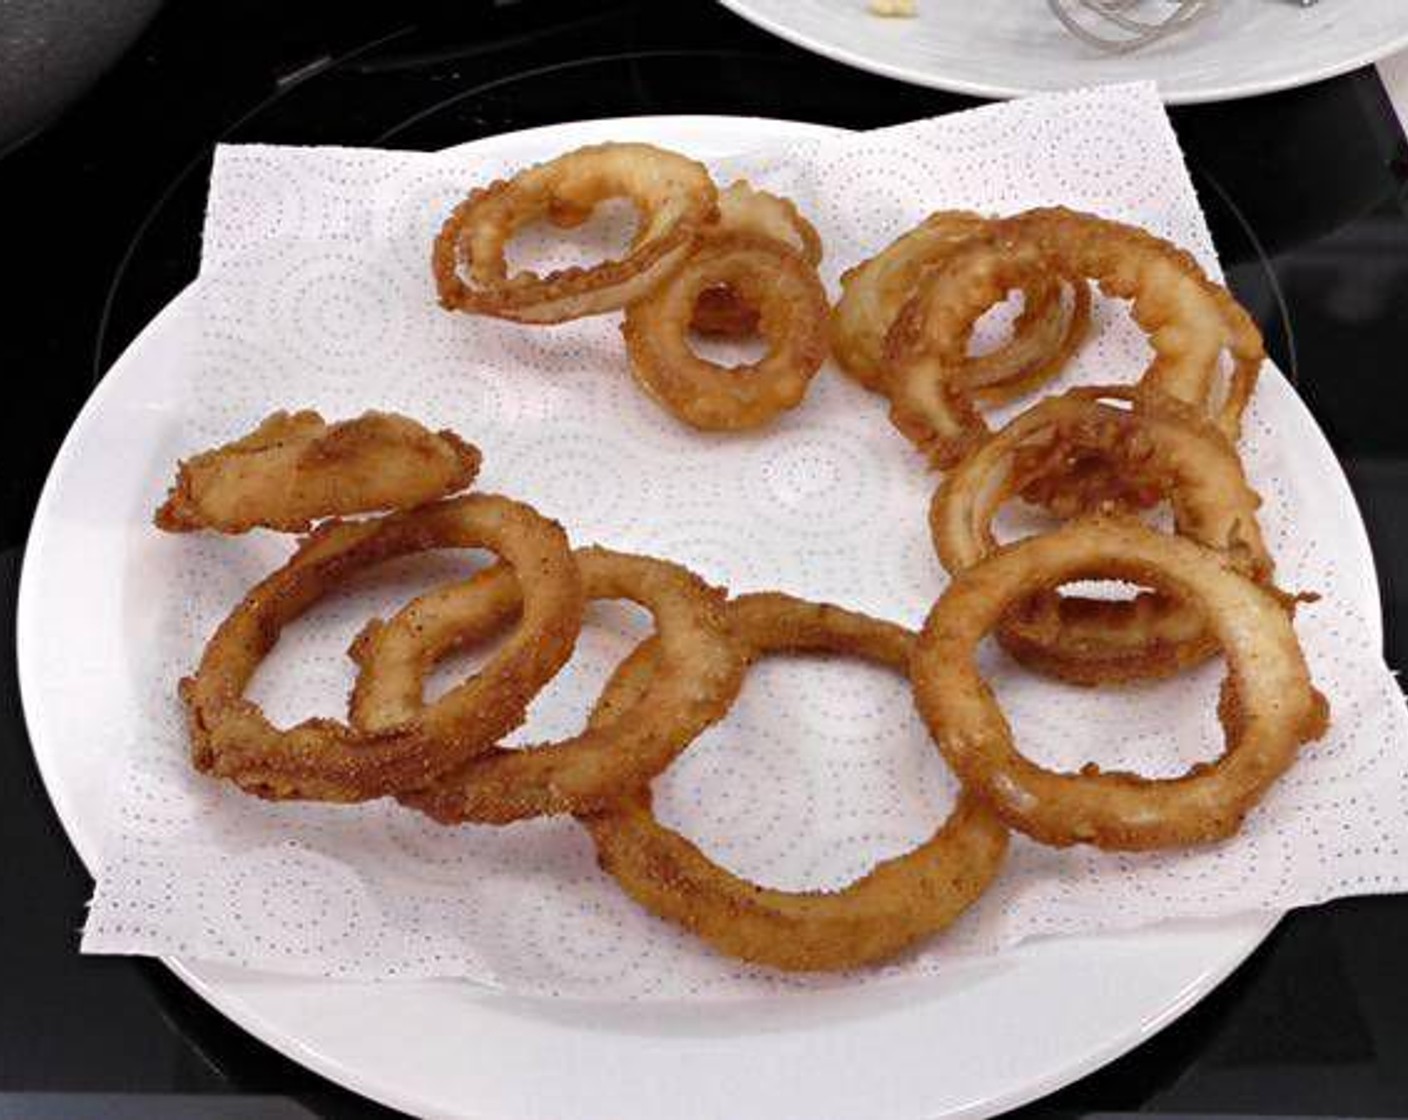 step 7 As the rings are finish frying, remove them from the frying pan and place them on a plate with paper towels to absorb the excess oil.